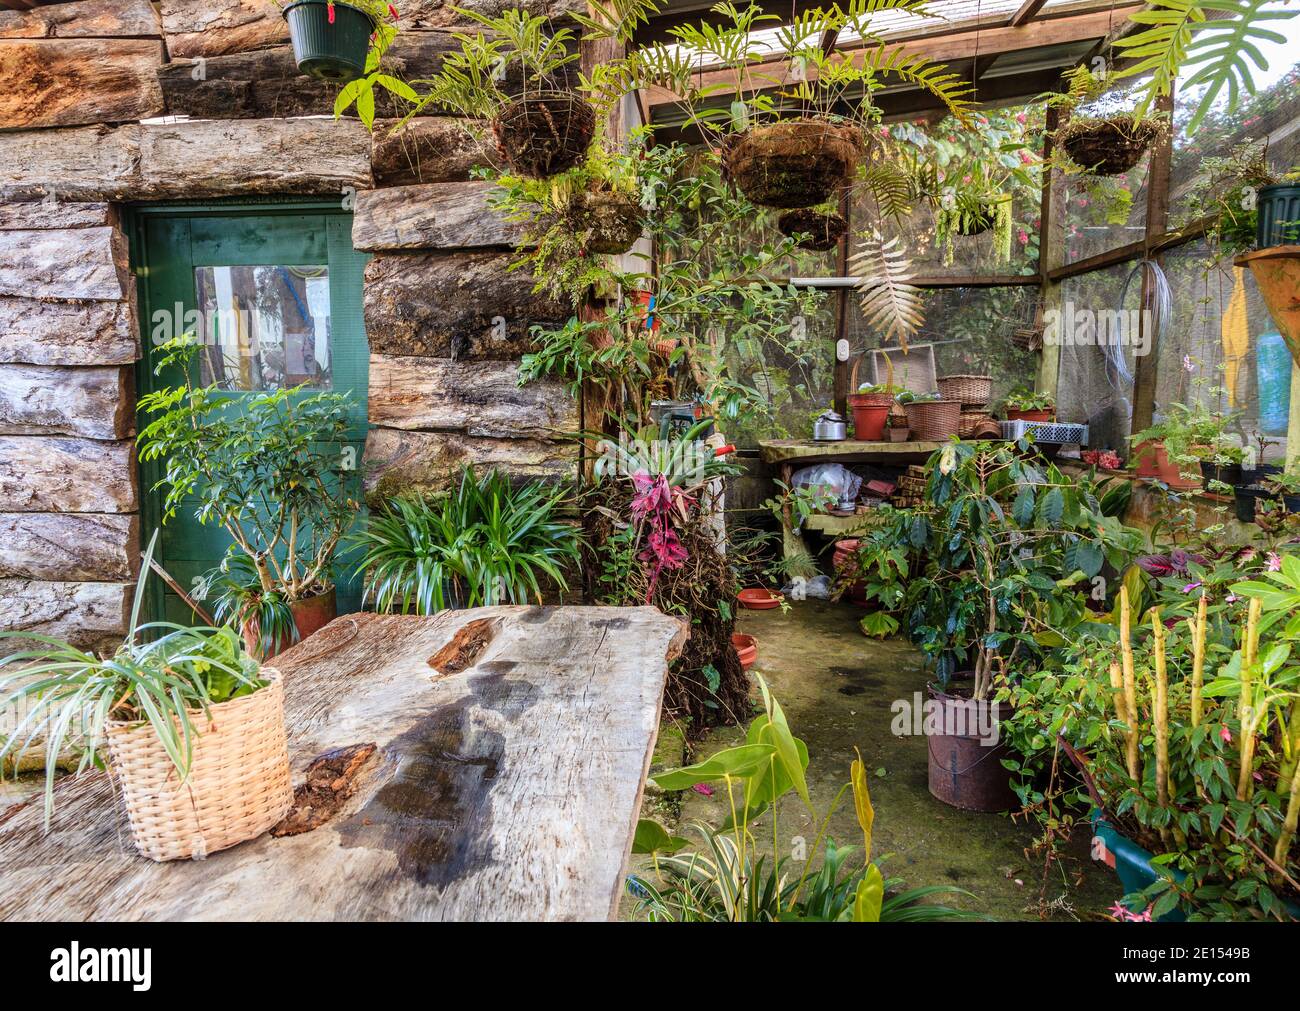 Interior of an old rustic green house with potted plants Stock Photo